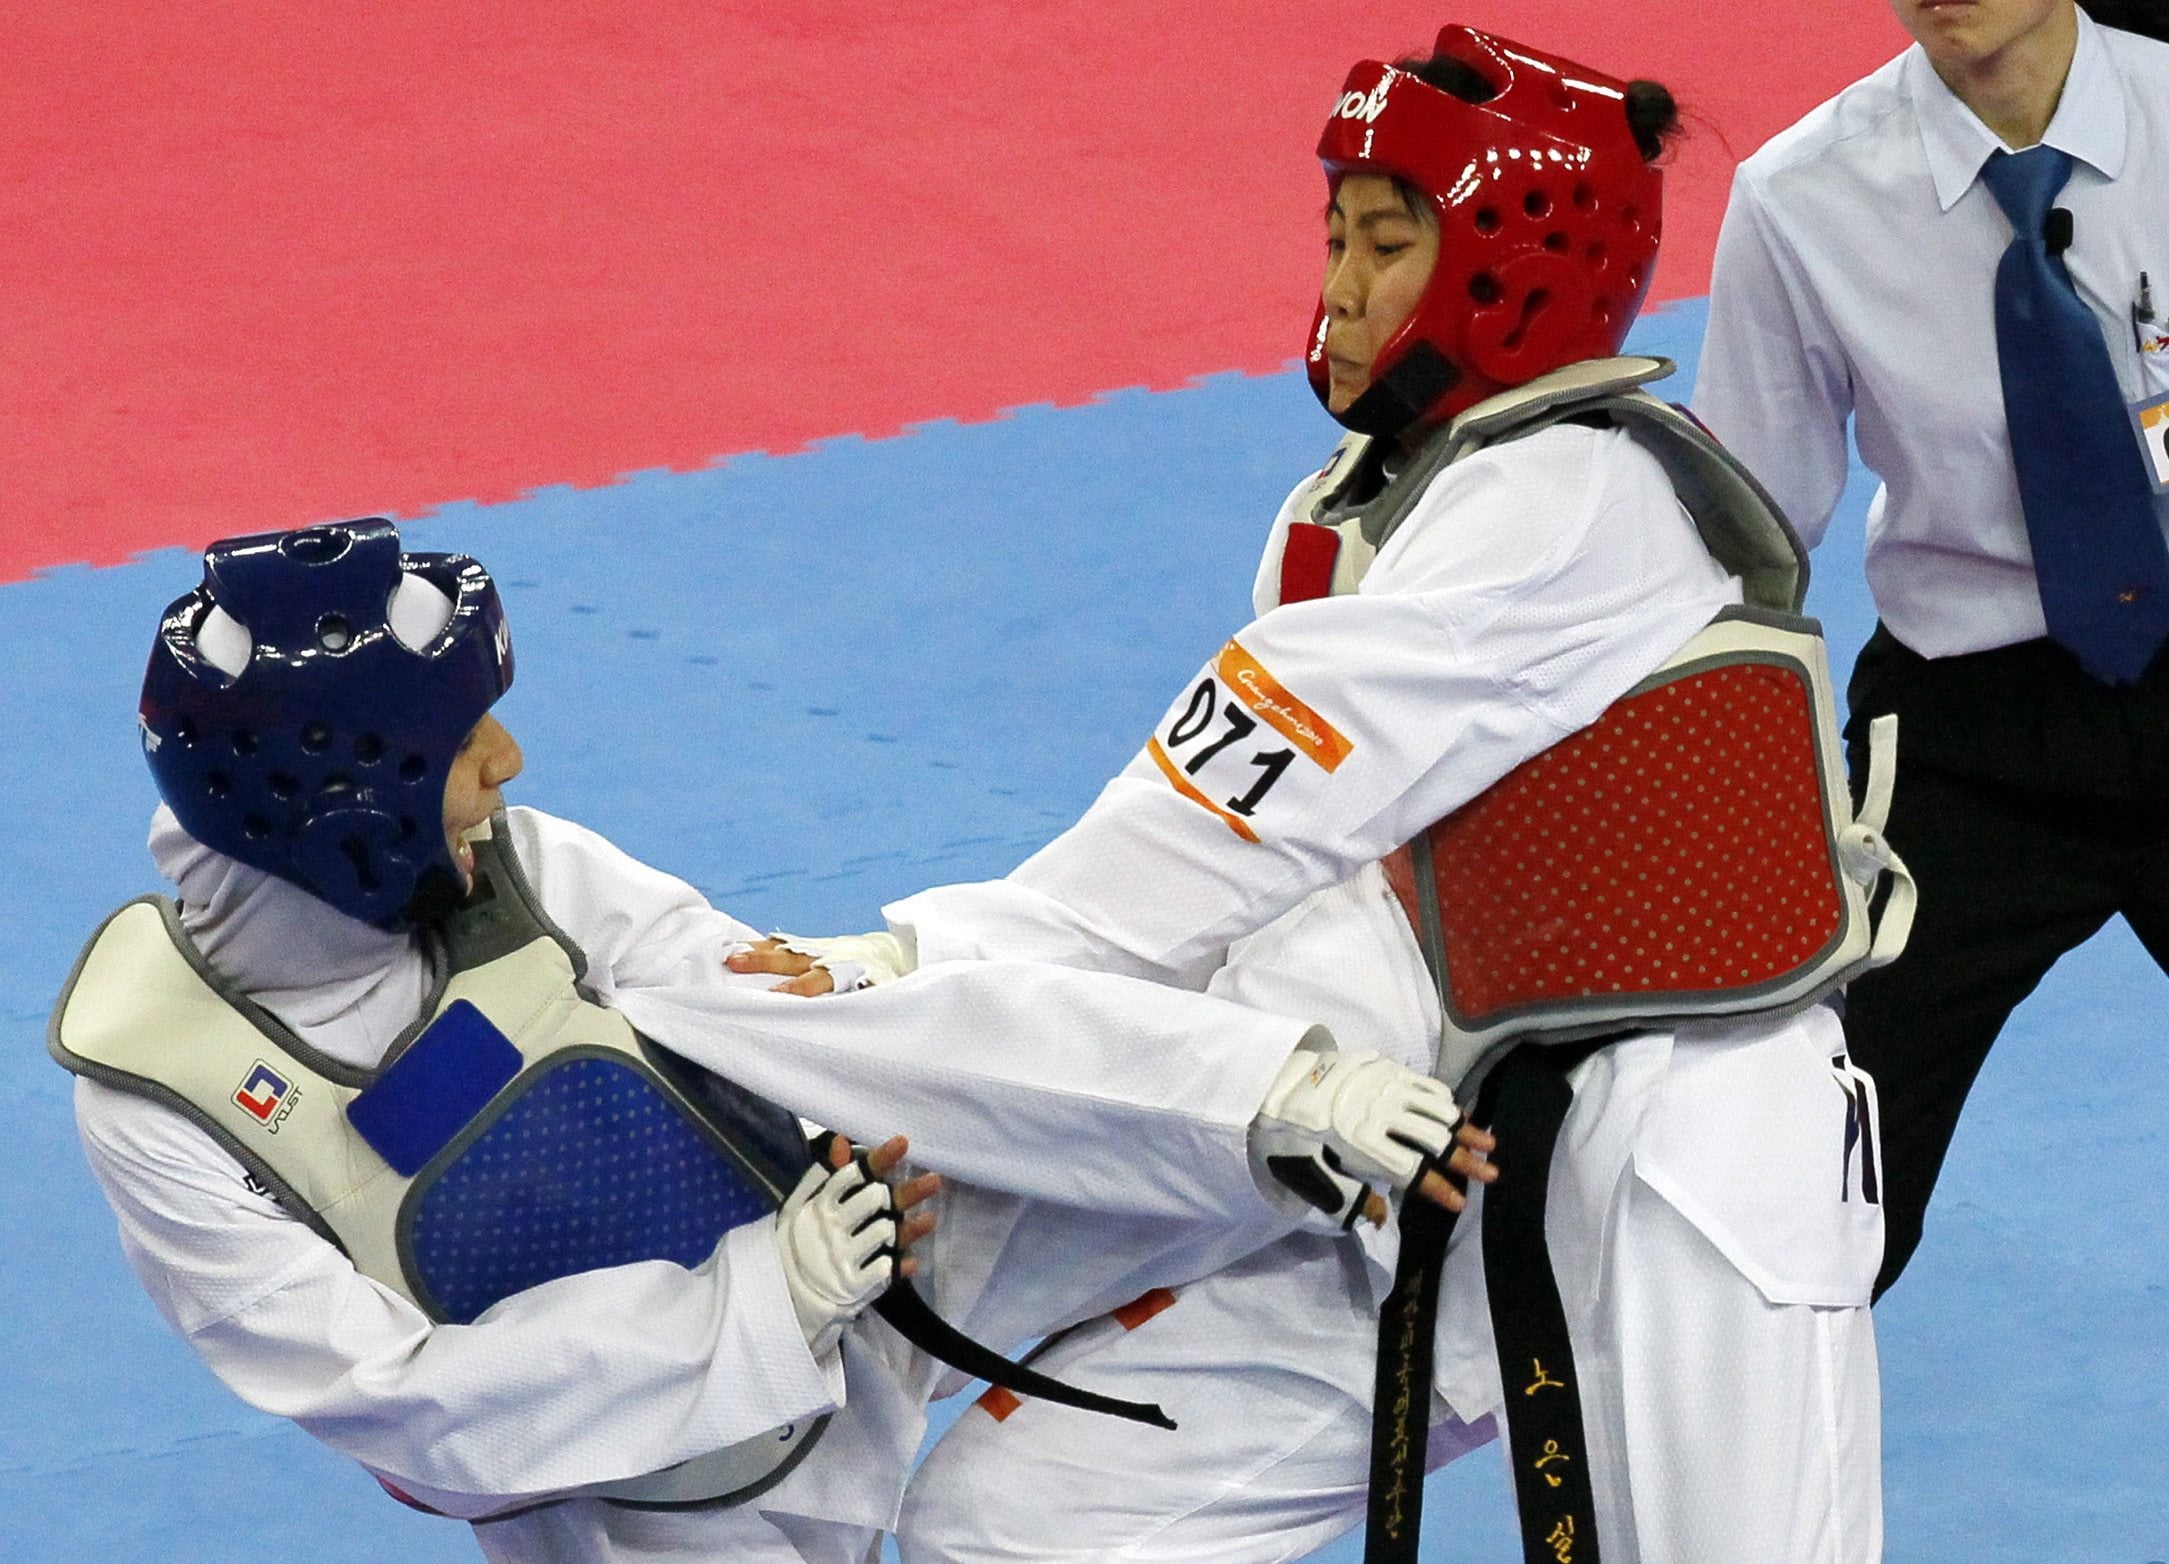 Raheleh Asemani of Iran, left, in action against  South Korea&#039;s Noh Eun-sil, during their women&#039;s under 62 Kg Taekwondo final at the 16th Asian Games in Guangzhou, China, in 2010.